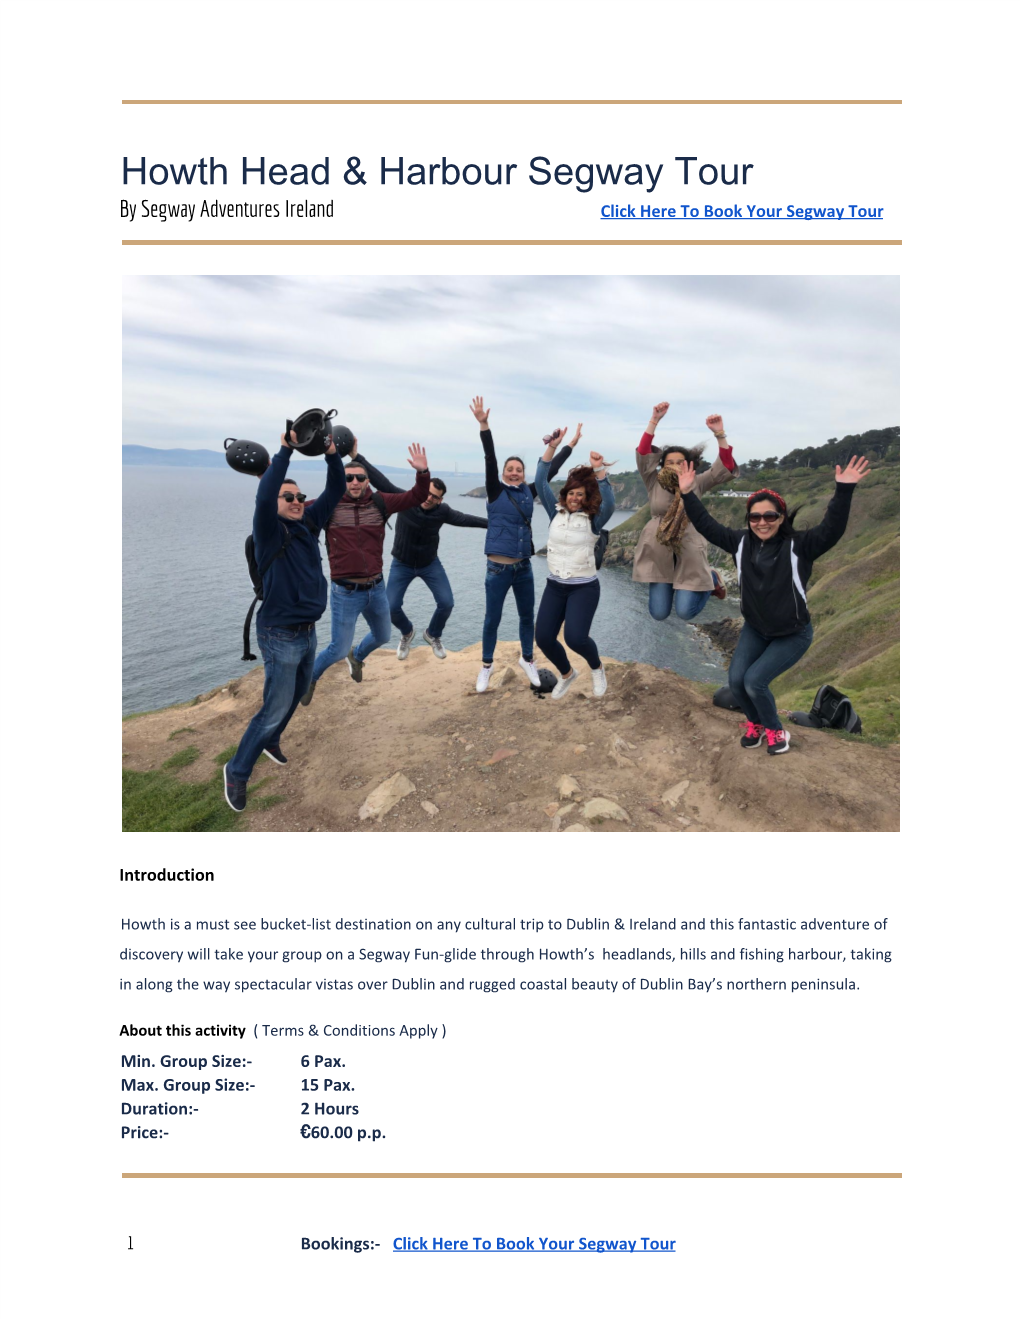 Howth Head & Harbour Segway Tour